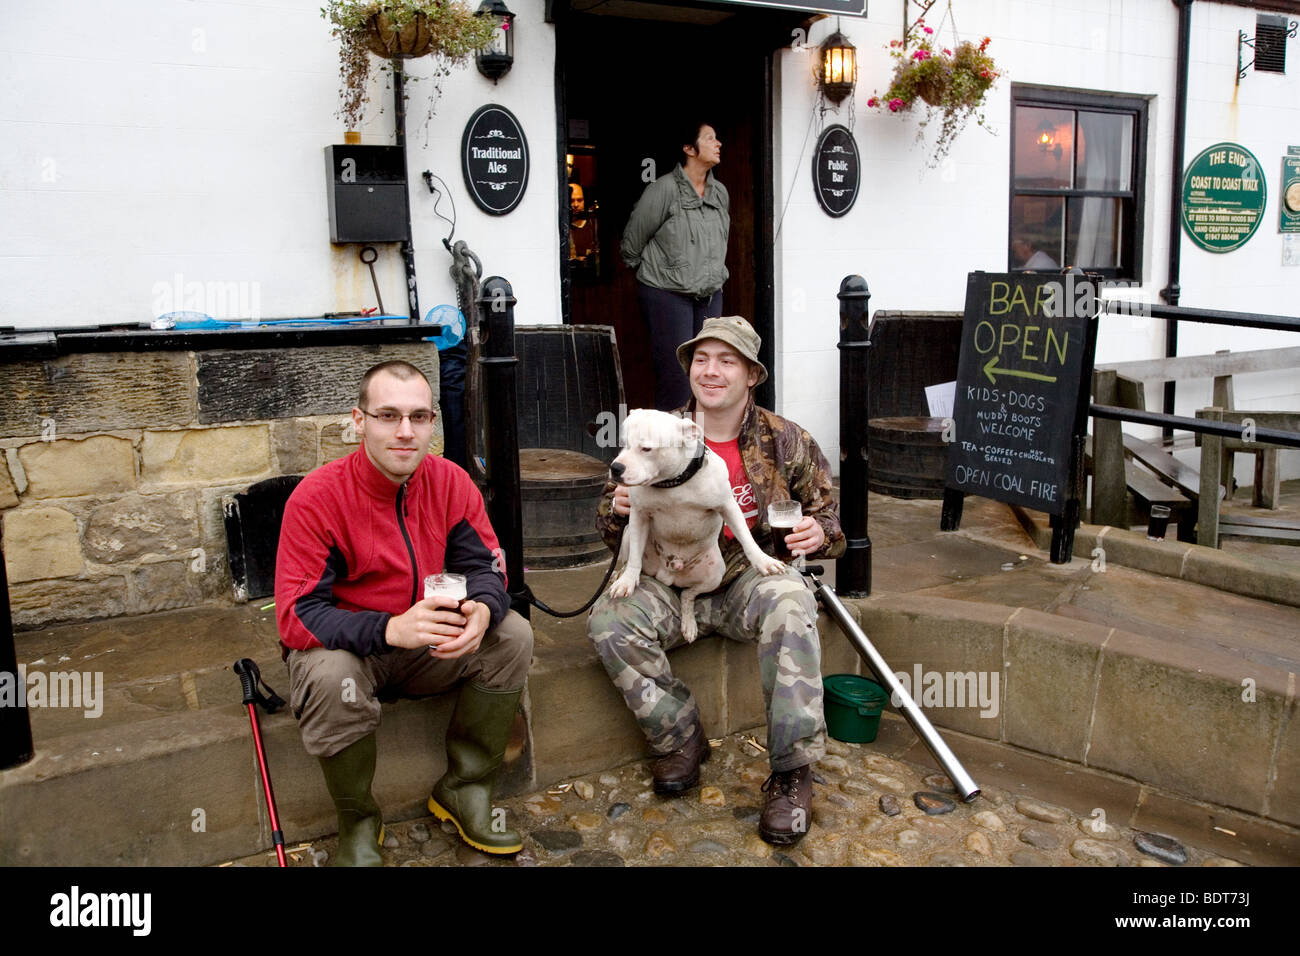 Walkers with their dog outside a pub in Robin Hoods Bay, North Yorkshire, England Stock Photo